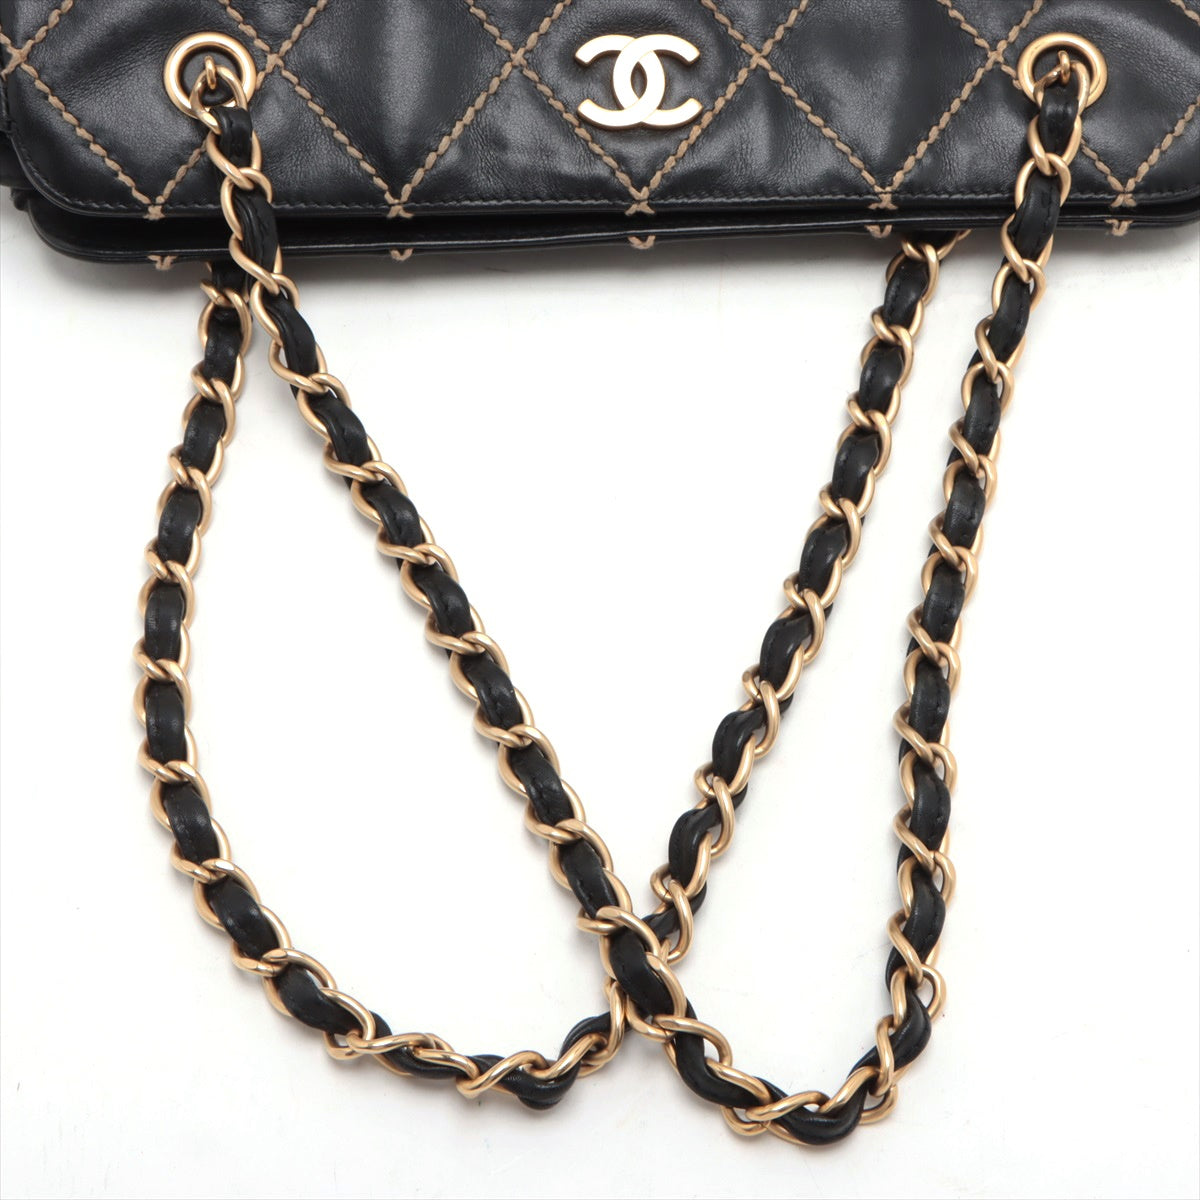 Chanel Wild Stitch Leather Chain tote bag Black Gold Metal fittings 8XXXXXX Snap loosening